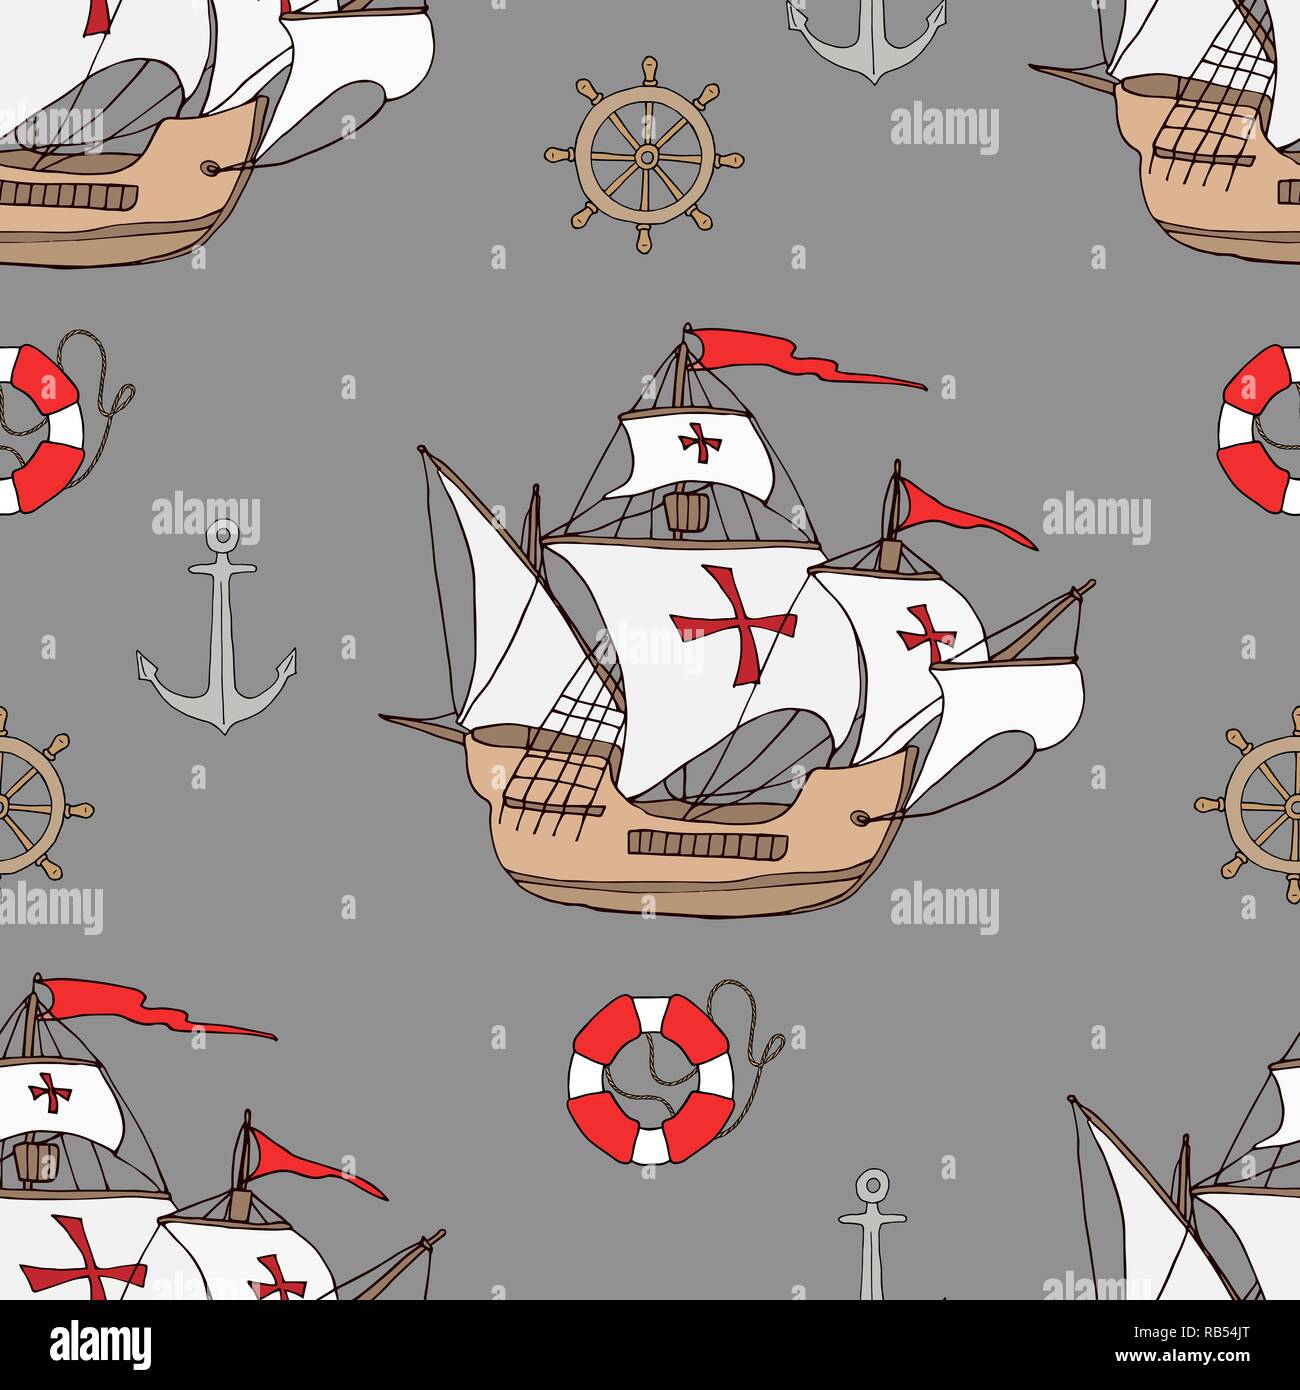 Seamless pattern maritime theme. The ship and other elements are painted by hand. Vector illustration. Stock Vector